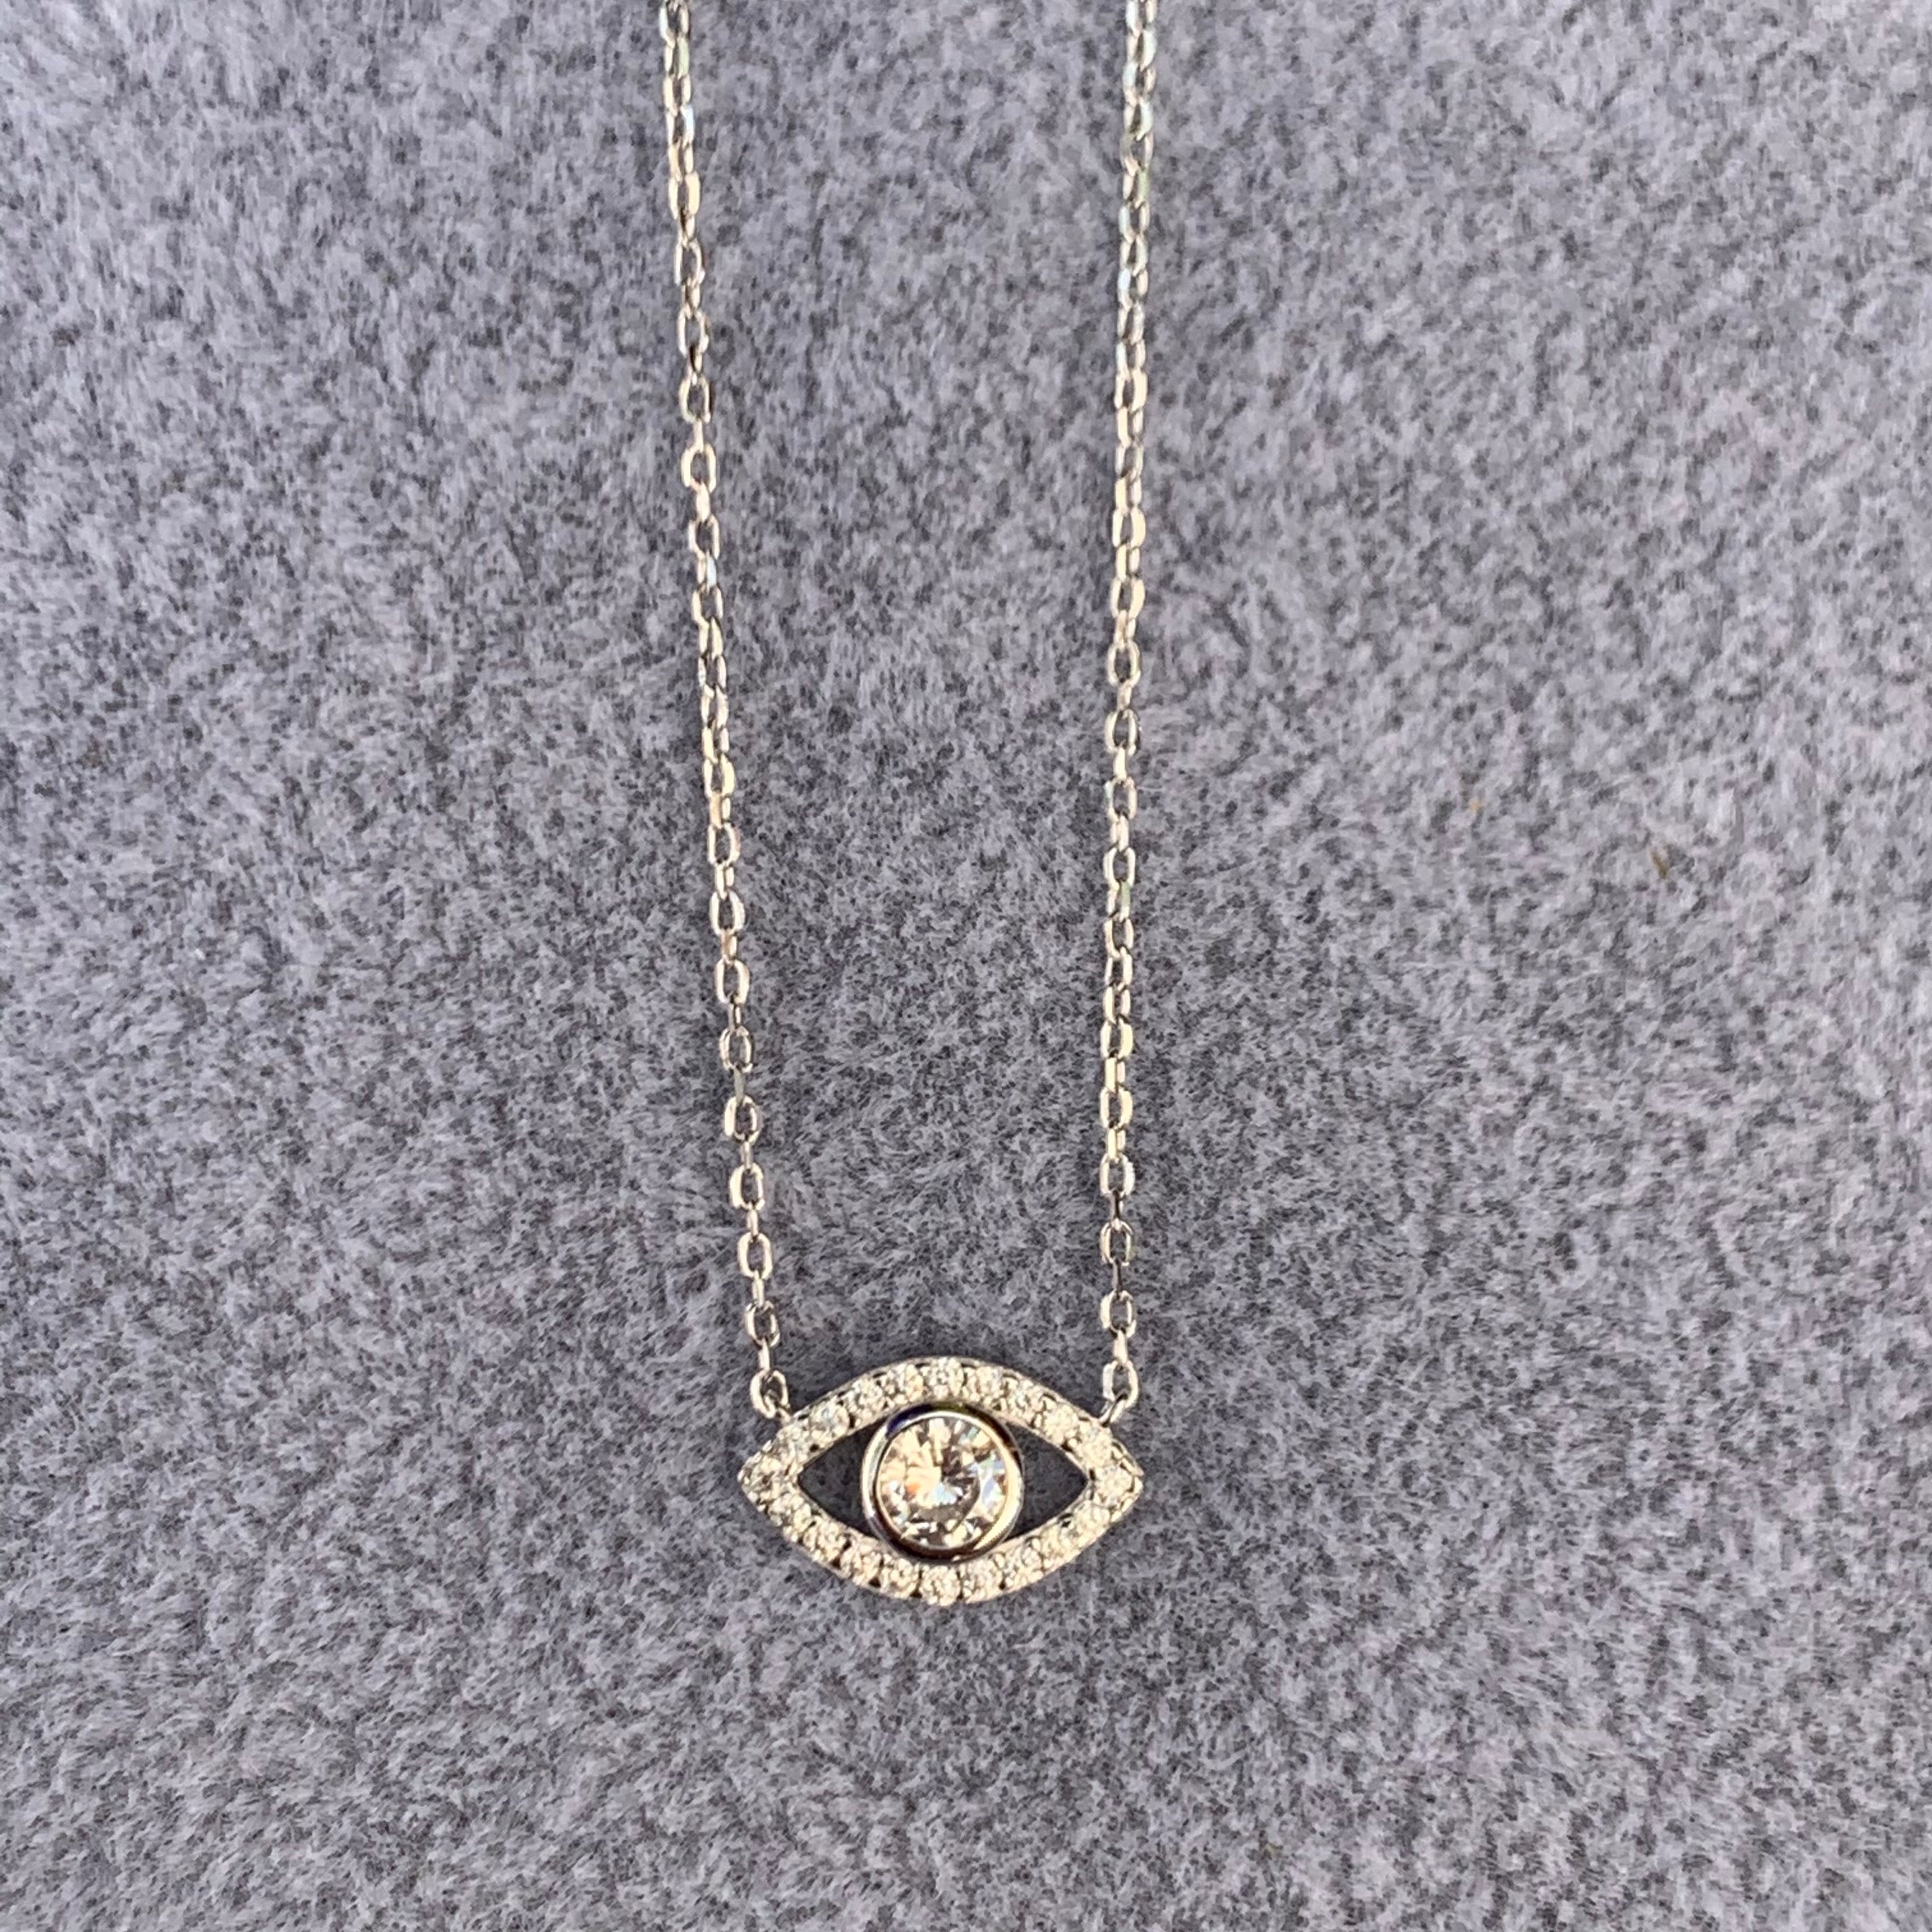 “Ojos” Sterling silver clear eye necklace - Free Gift